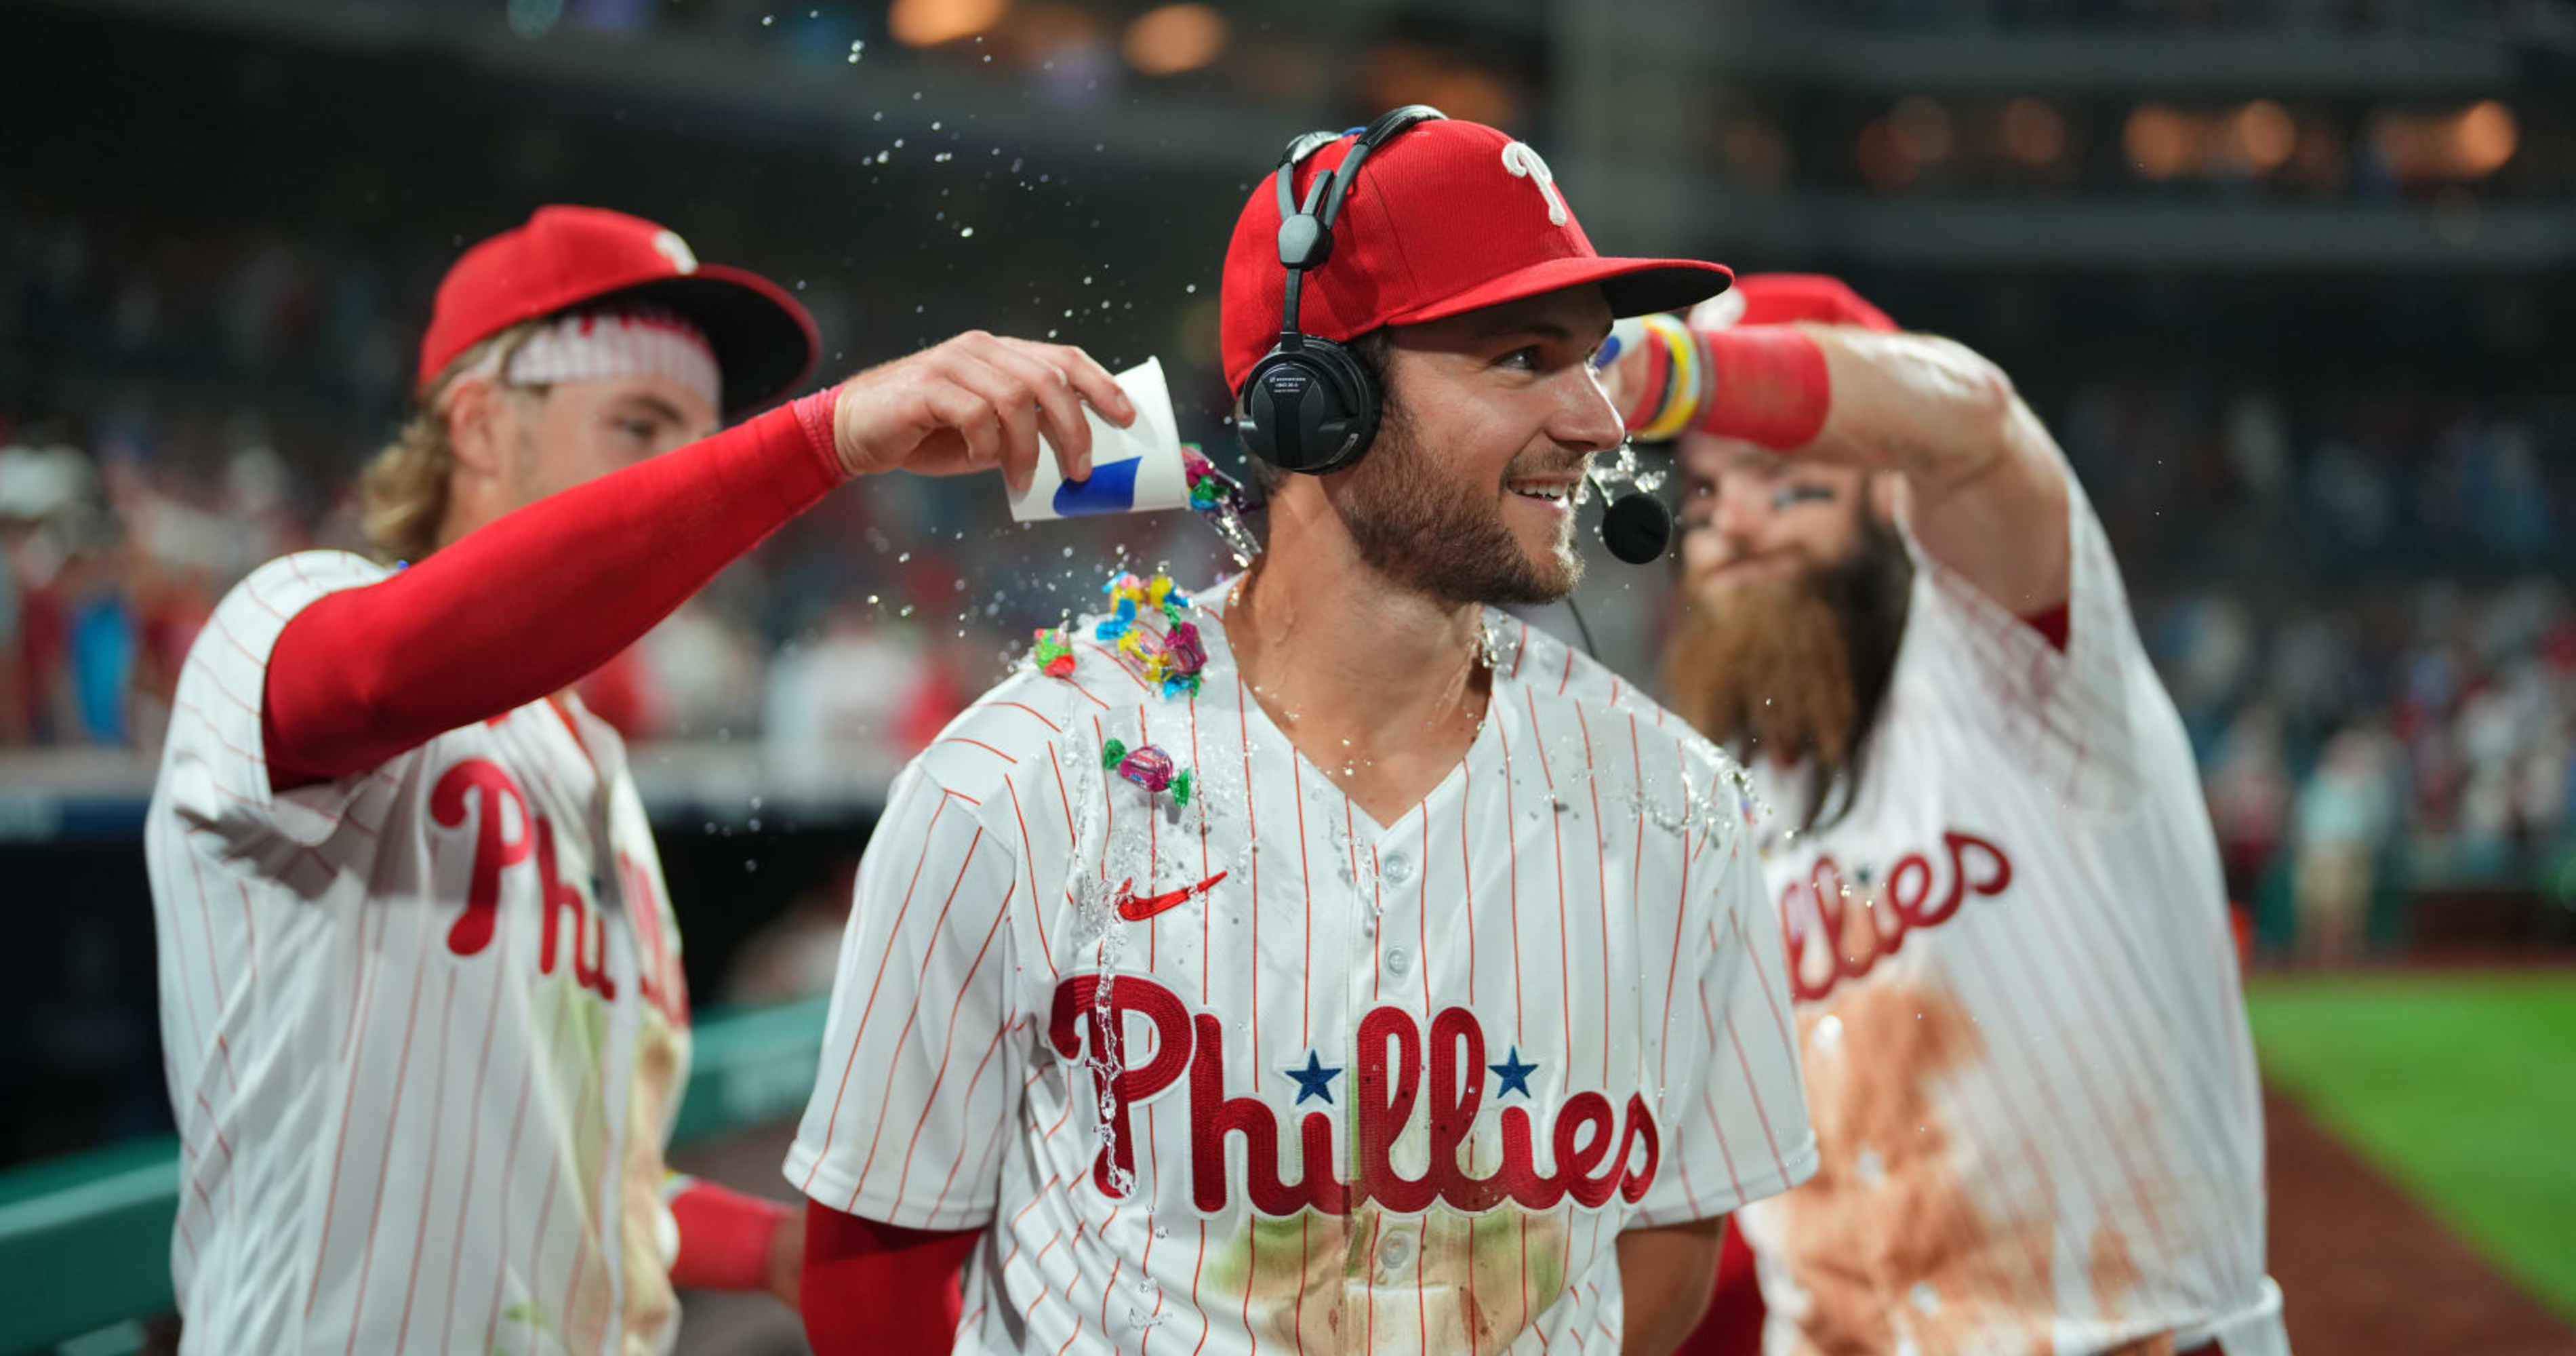 Get ready for July 4 with Philadelphia Phillies gear